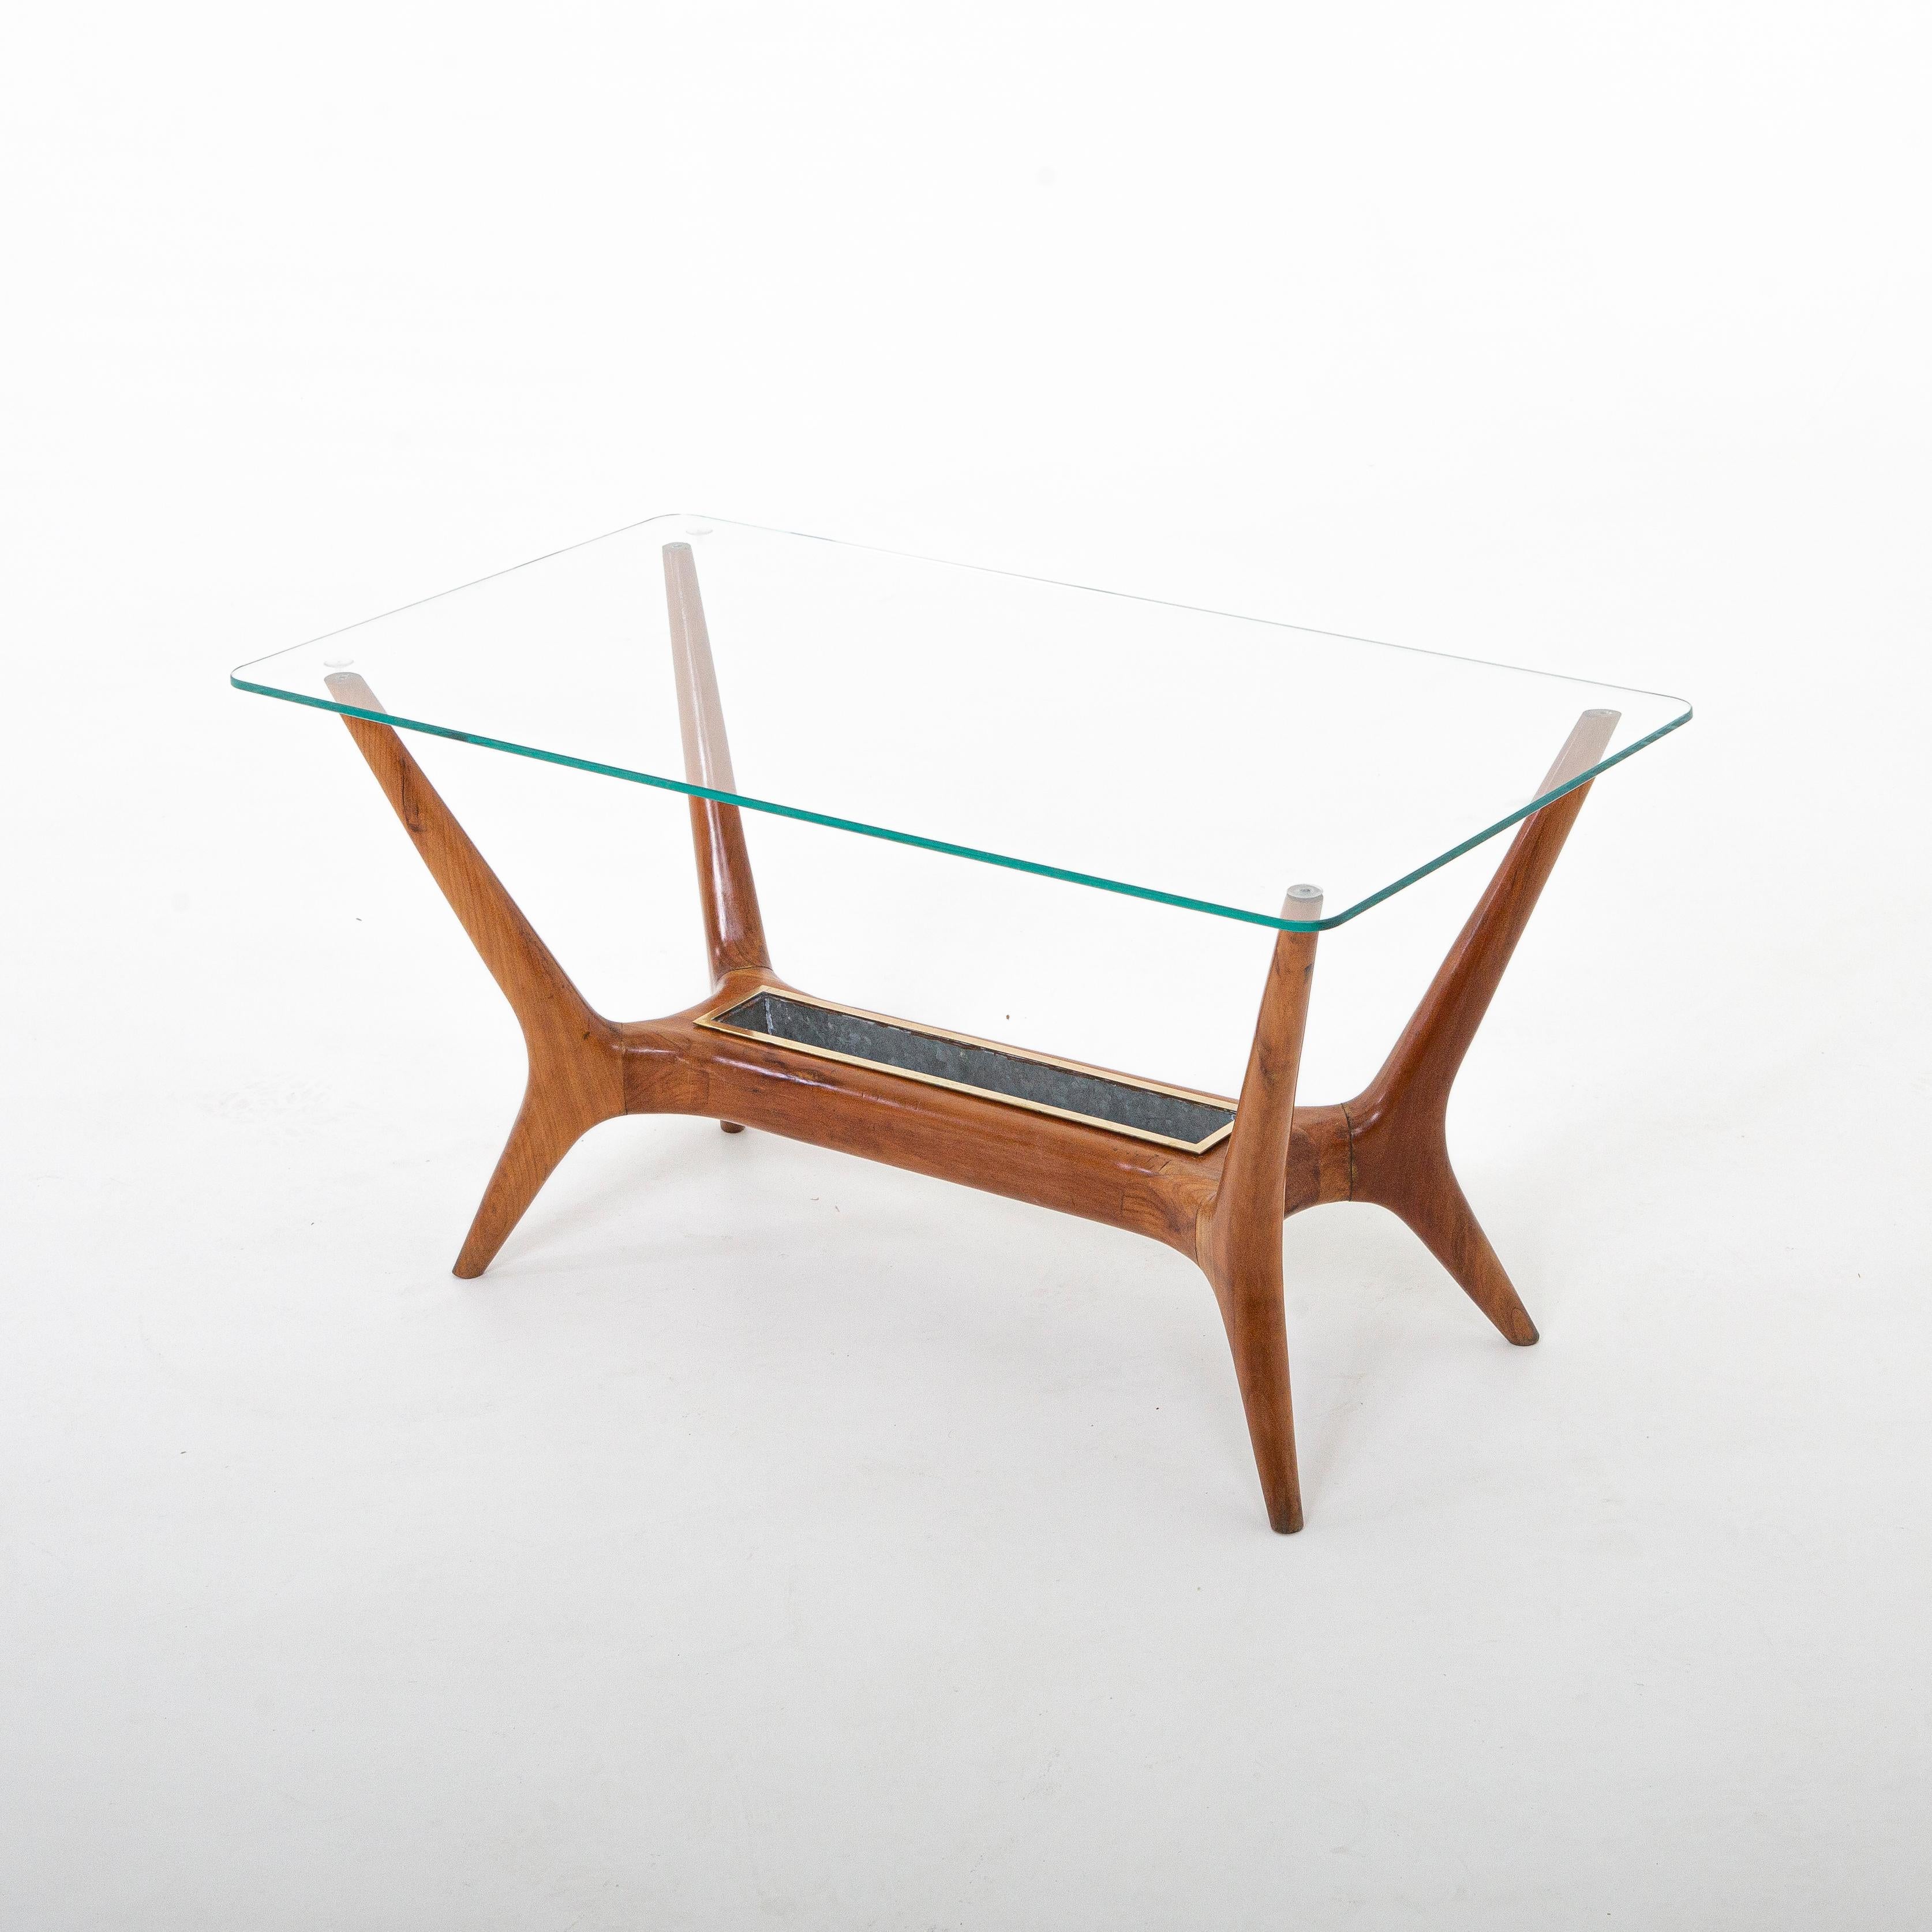 Mid-20th Century Italian Modernist Cocktail Table Attributed to Gio Ponti For Sale